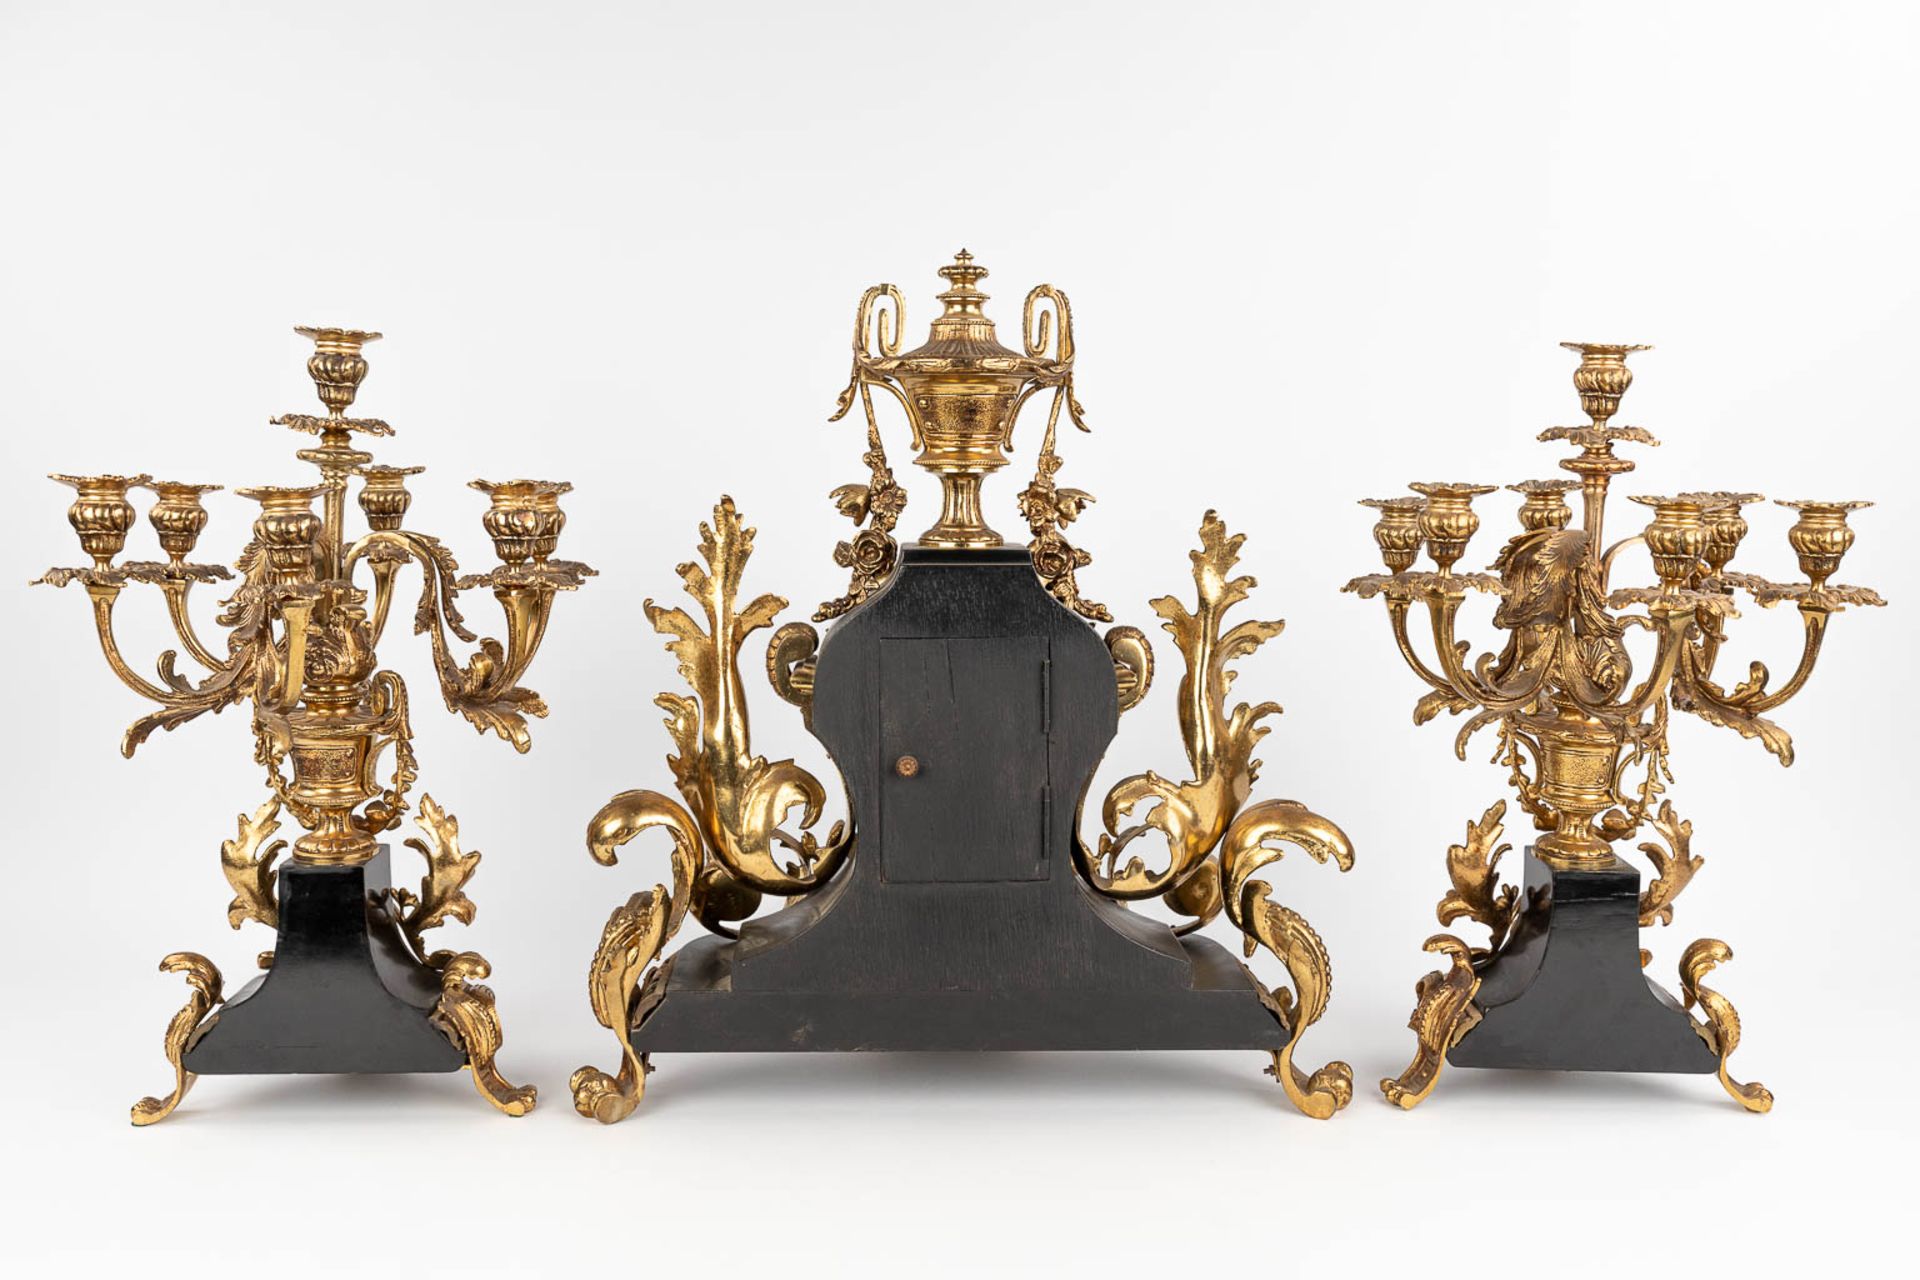 A three-piece mantle garniture clock and candelabra, Louis XV style. Circa 1970. (D:25 x W:51 x H:55 - Image 5 of 14